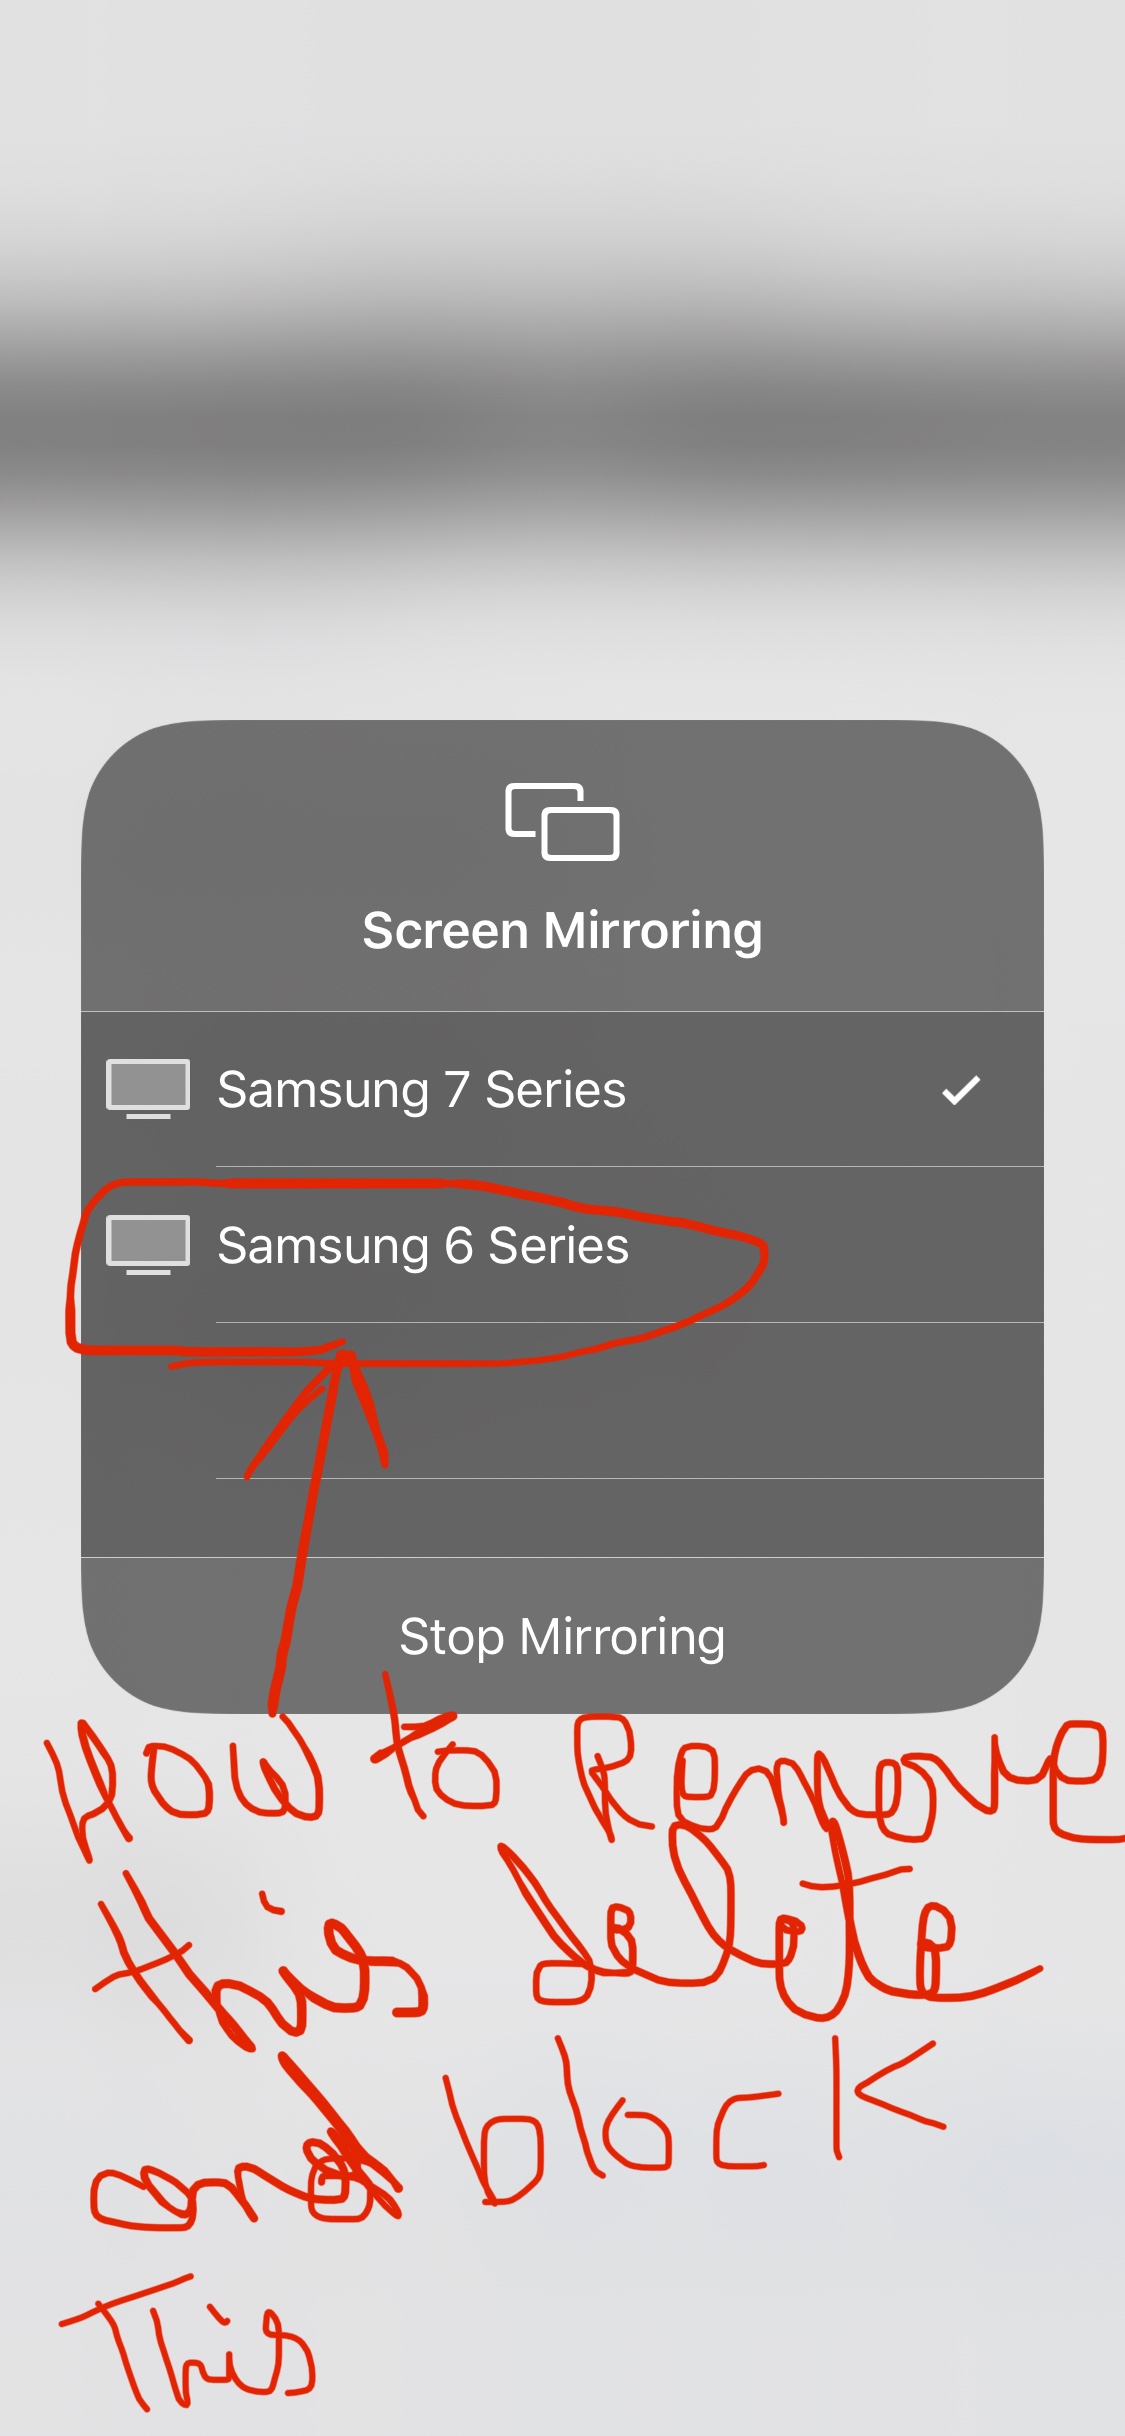 How To Remove Samsung Tv From Iphone, How To Disable Screen Mirroring Iphone 7